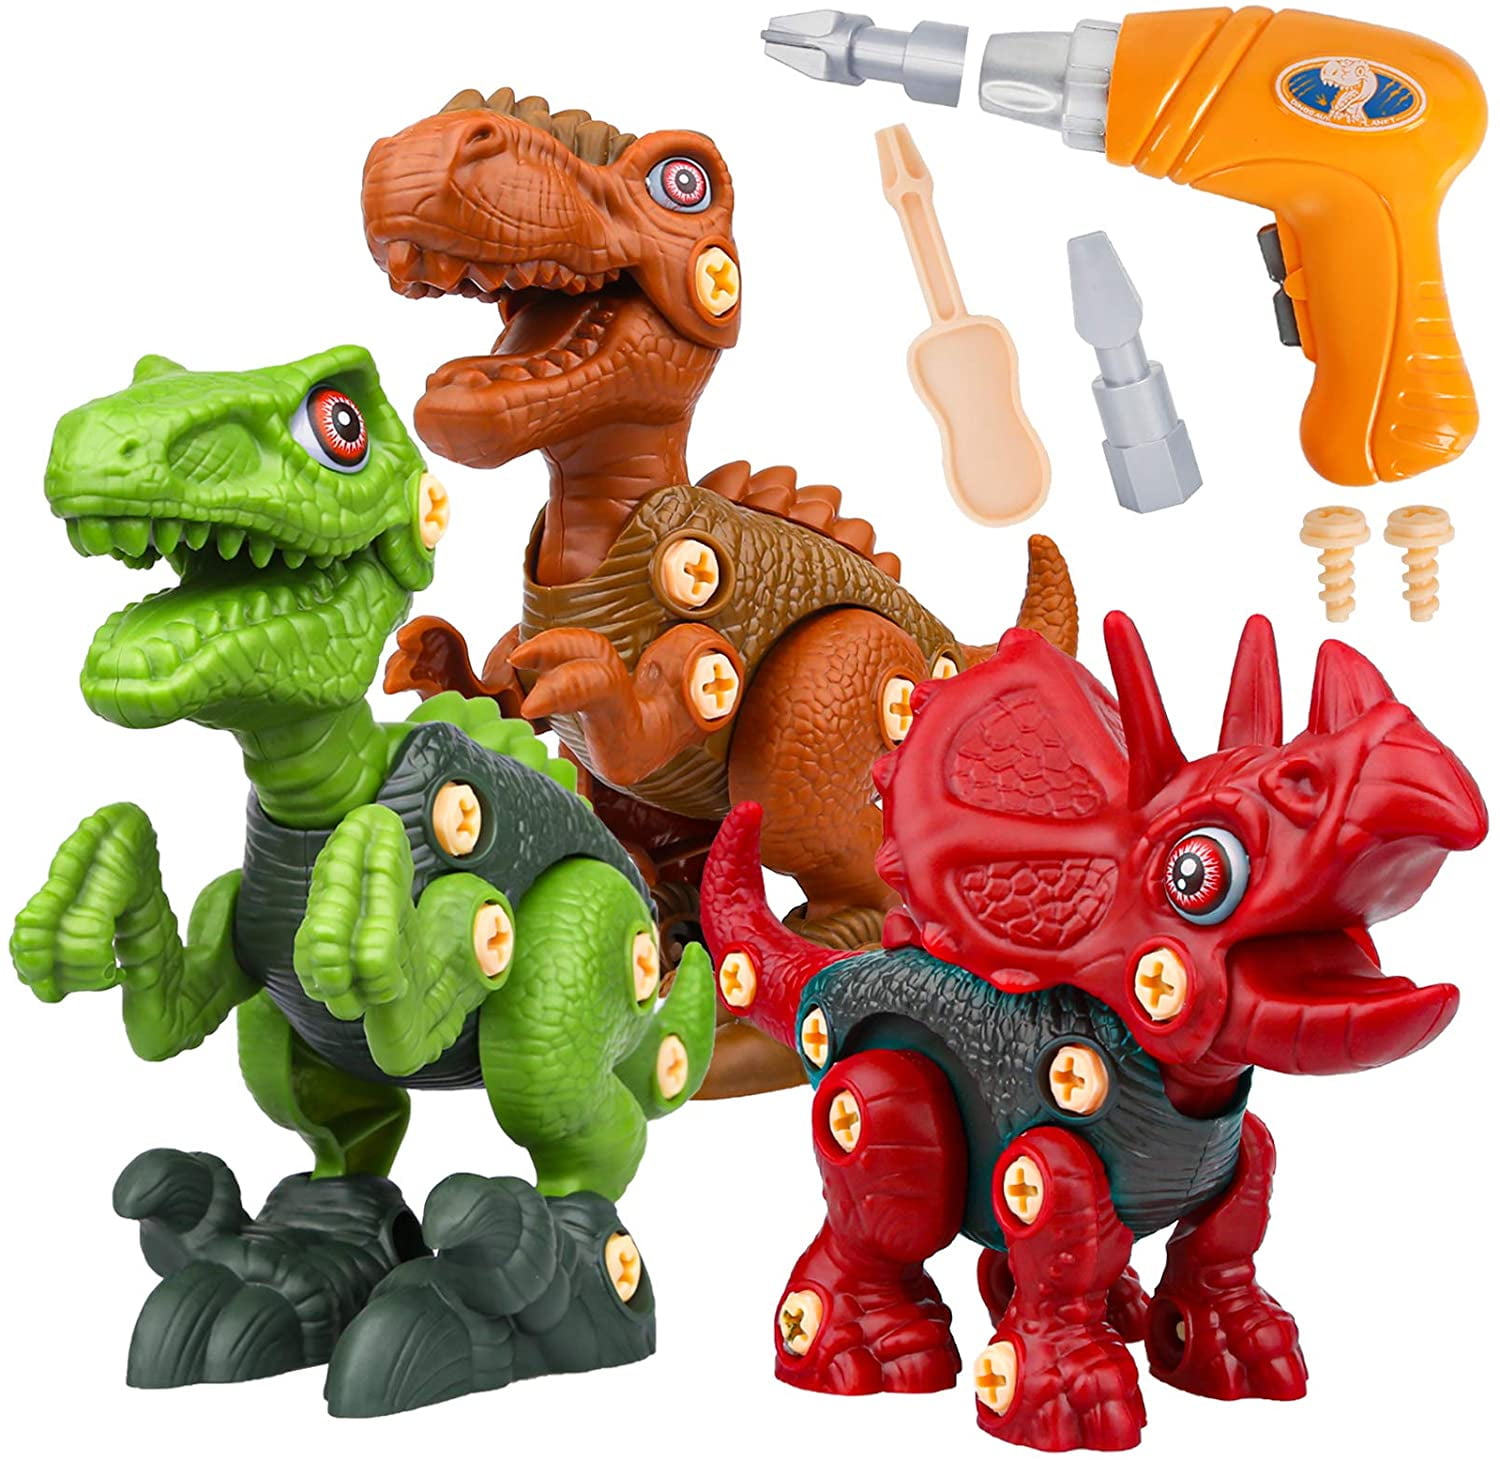 Educational Learning Kid Toys for 3 4 5 6 Year Old Boys Girls Halloween Jurassic Dino Eggs DIY Construction Building Toys with Platform yoptote Take Apart Dinosaur Toys for Kids Age 3-5 